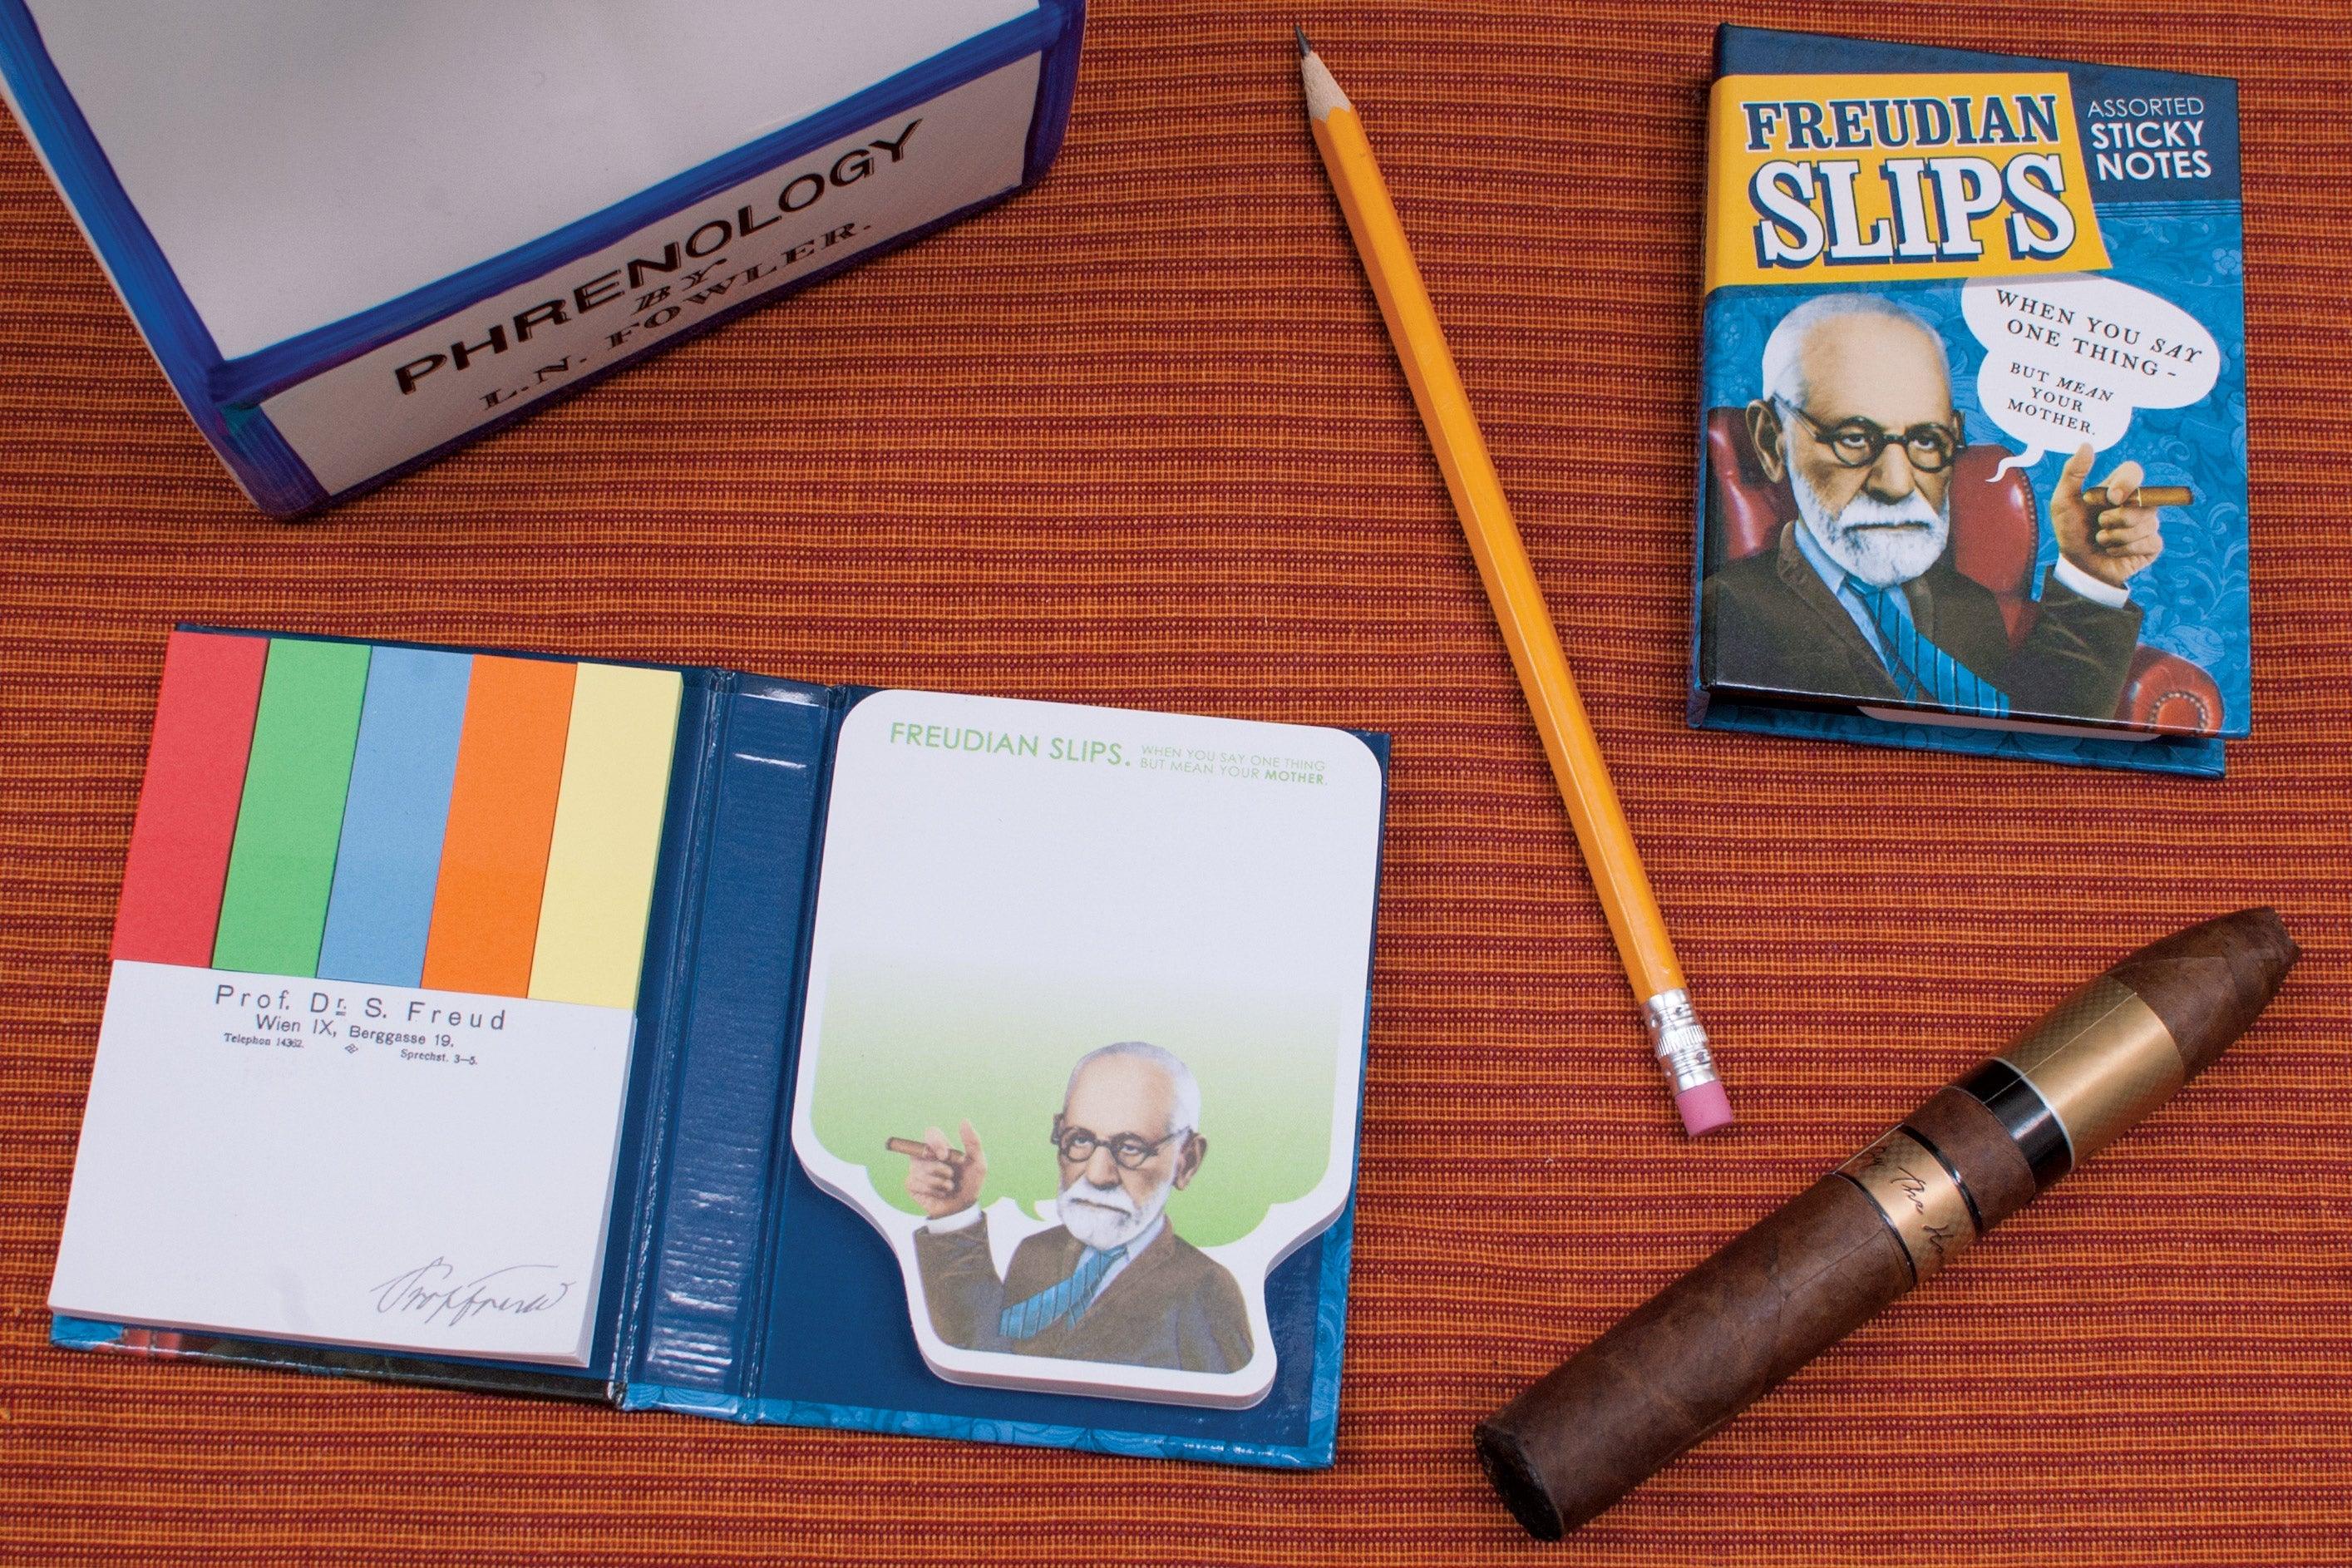 Product photo of Freudian Slips Sticky Notes, a novelty gift manufactured by The Unemployed Philosophers Guild.